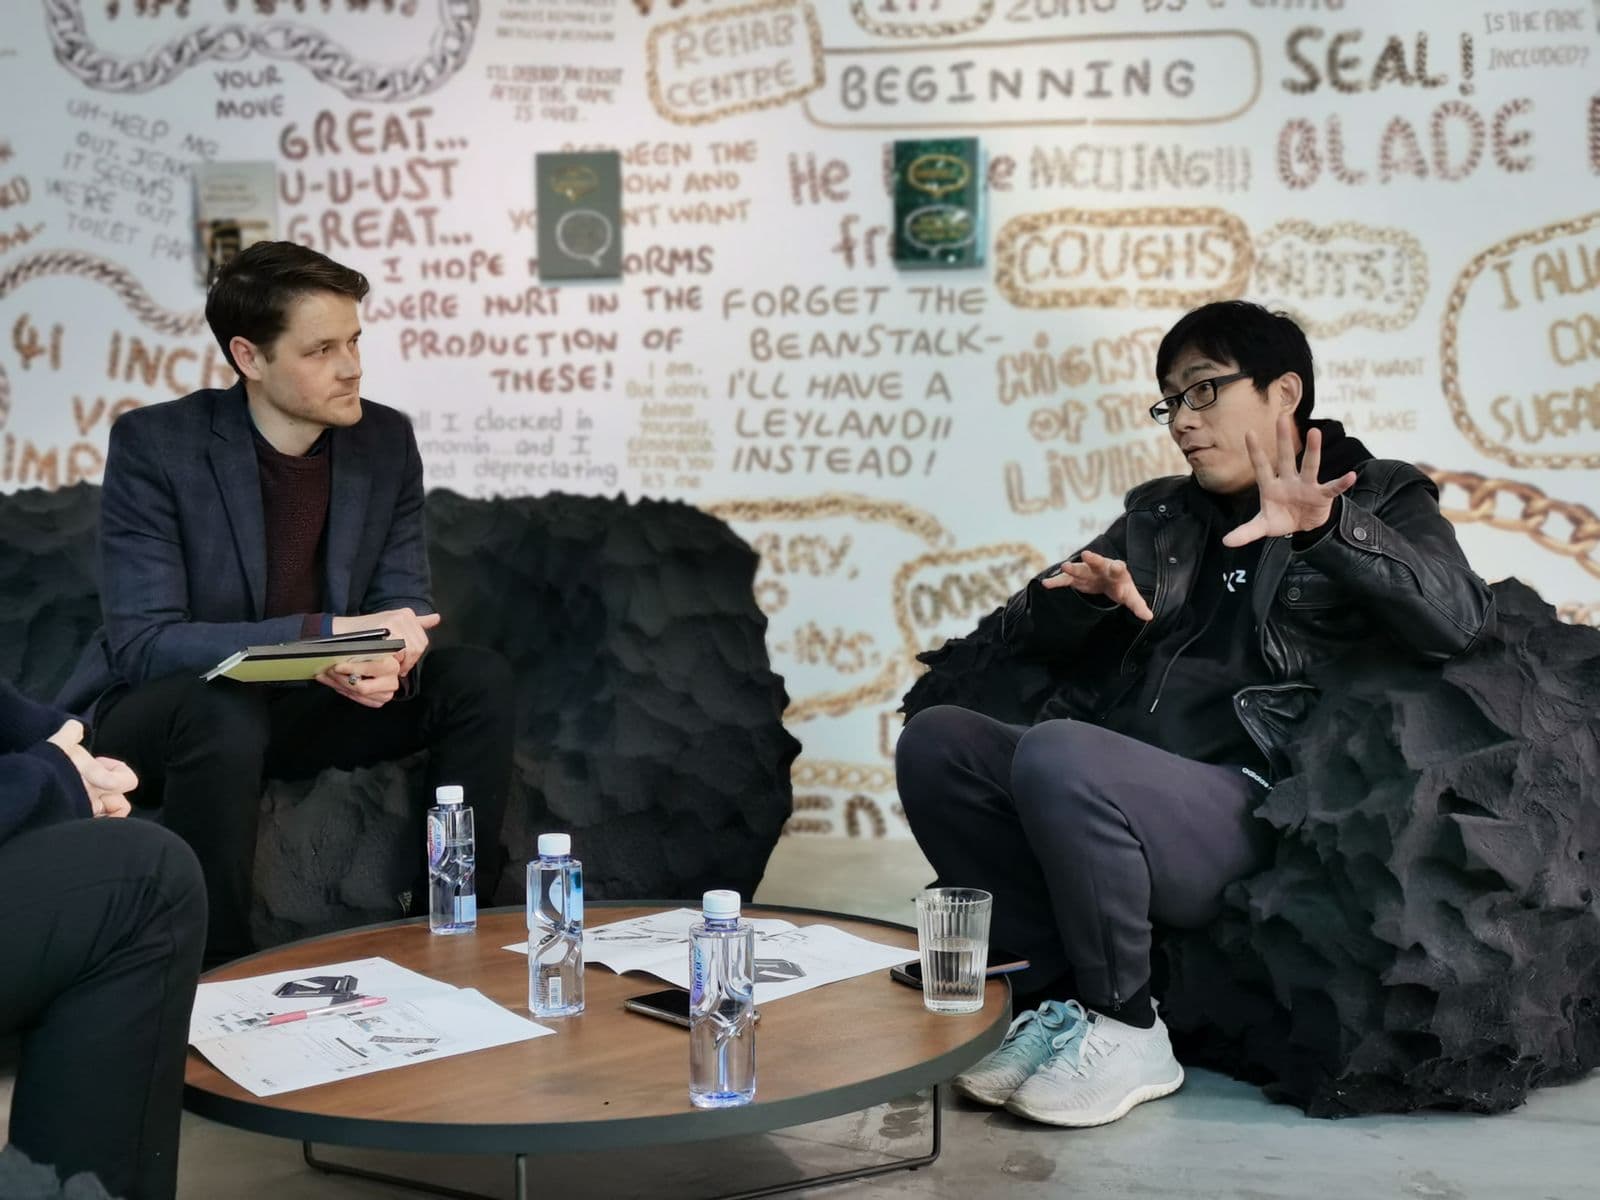 Two men sit on chairs talking